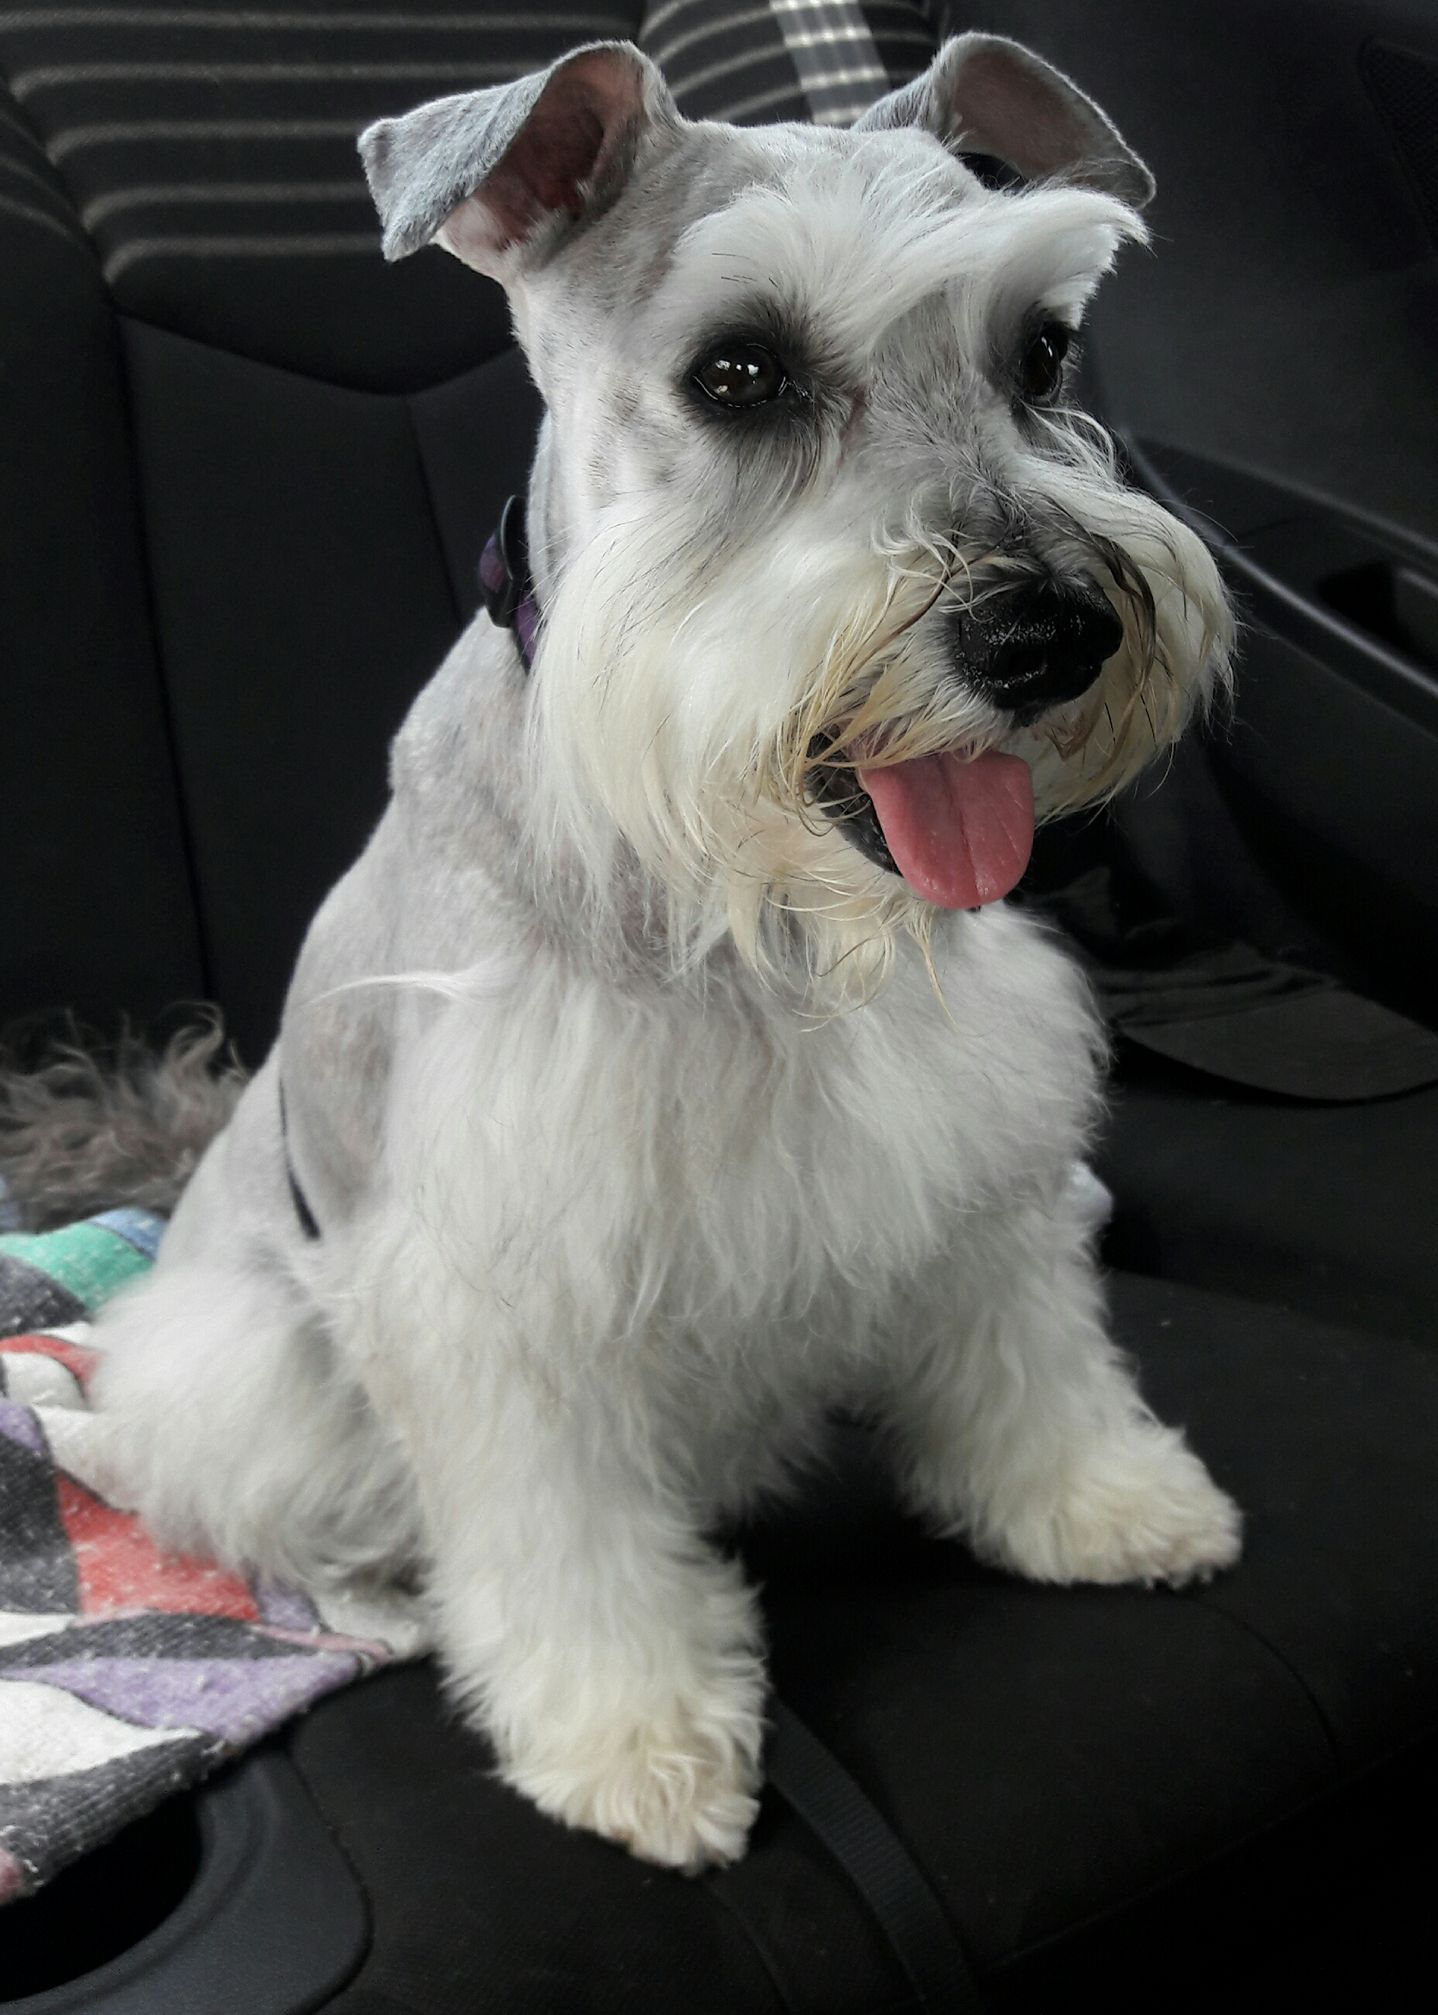 A Schnauzer sitting in the backseat while smiling with its tongue out